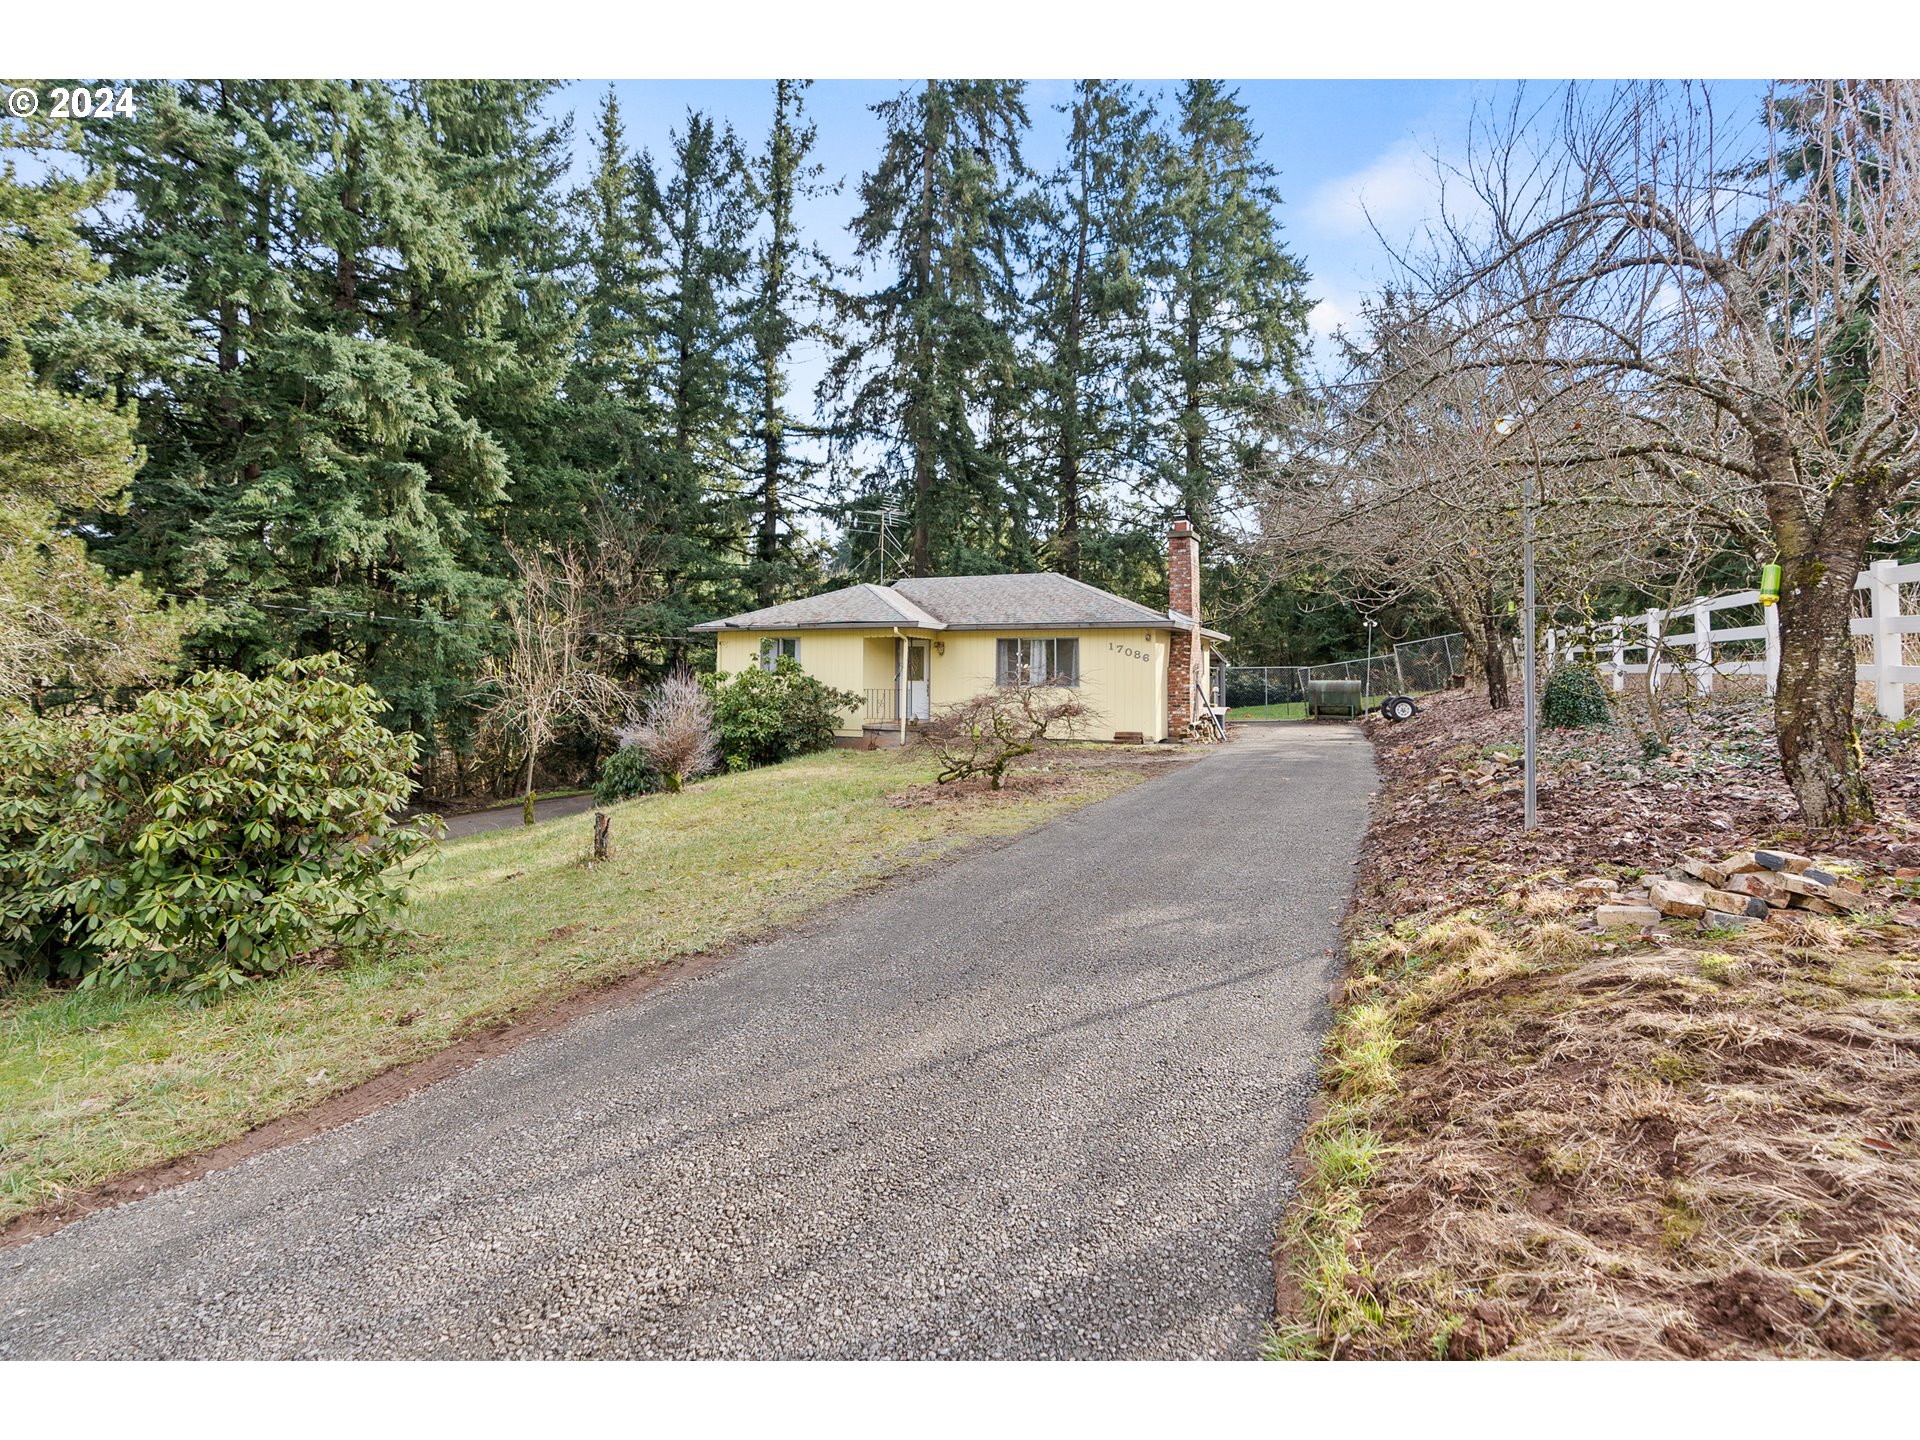 17086 S GRONLUND RD, Oregon City, OR 